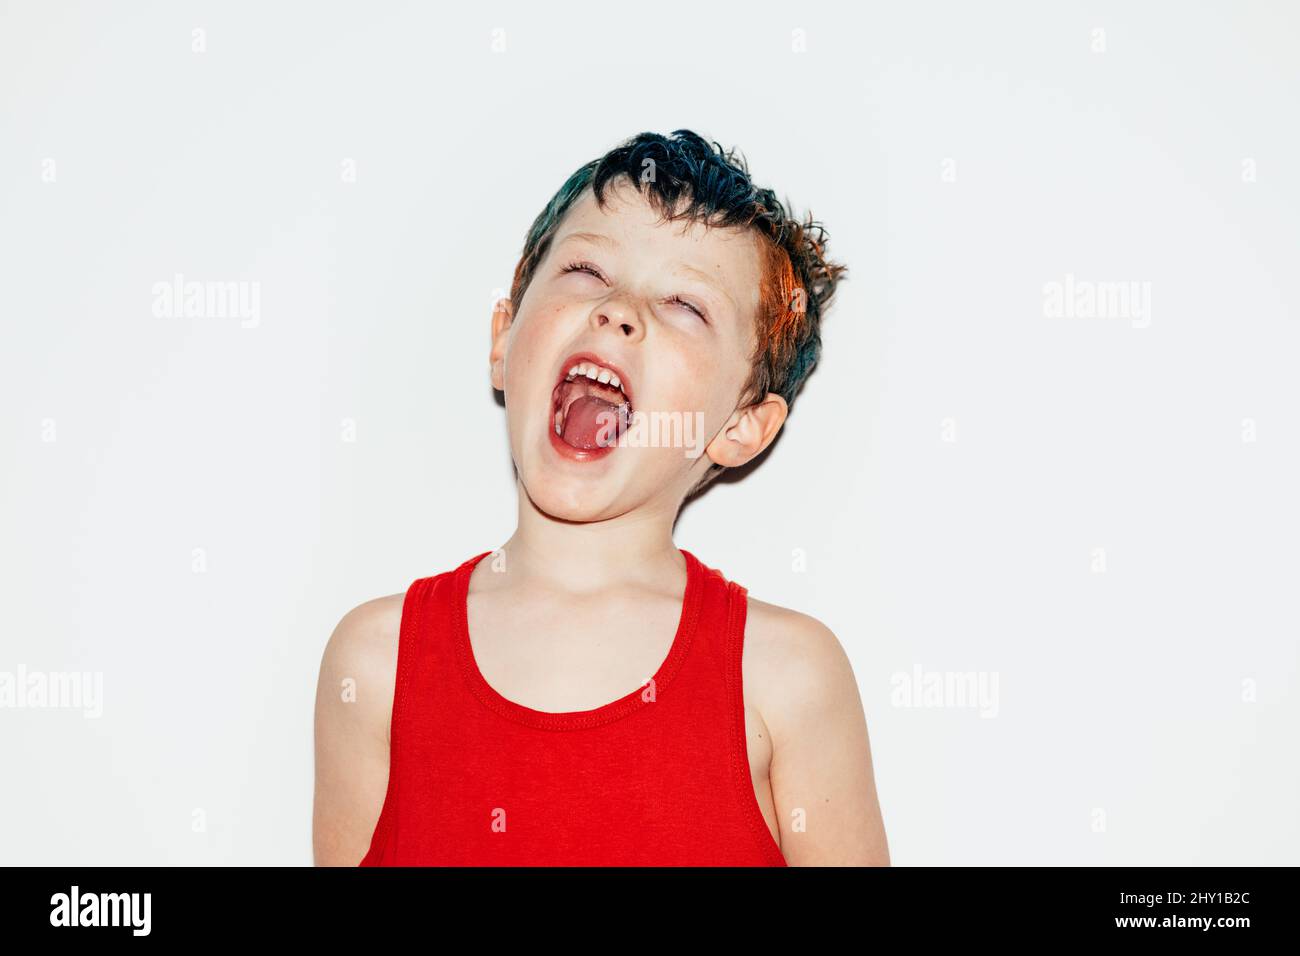 Mischievous boy with colorful dyed hair rolling eyes and showing tongue on white background in light room Stock Photo